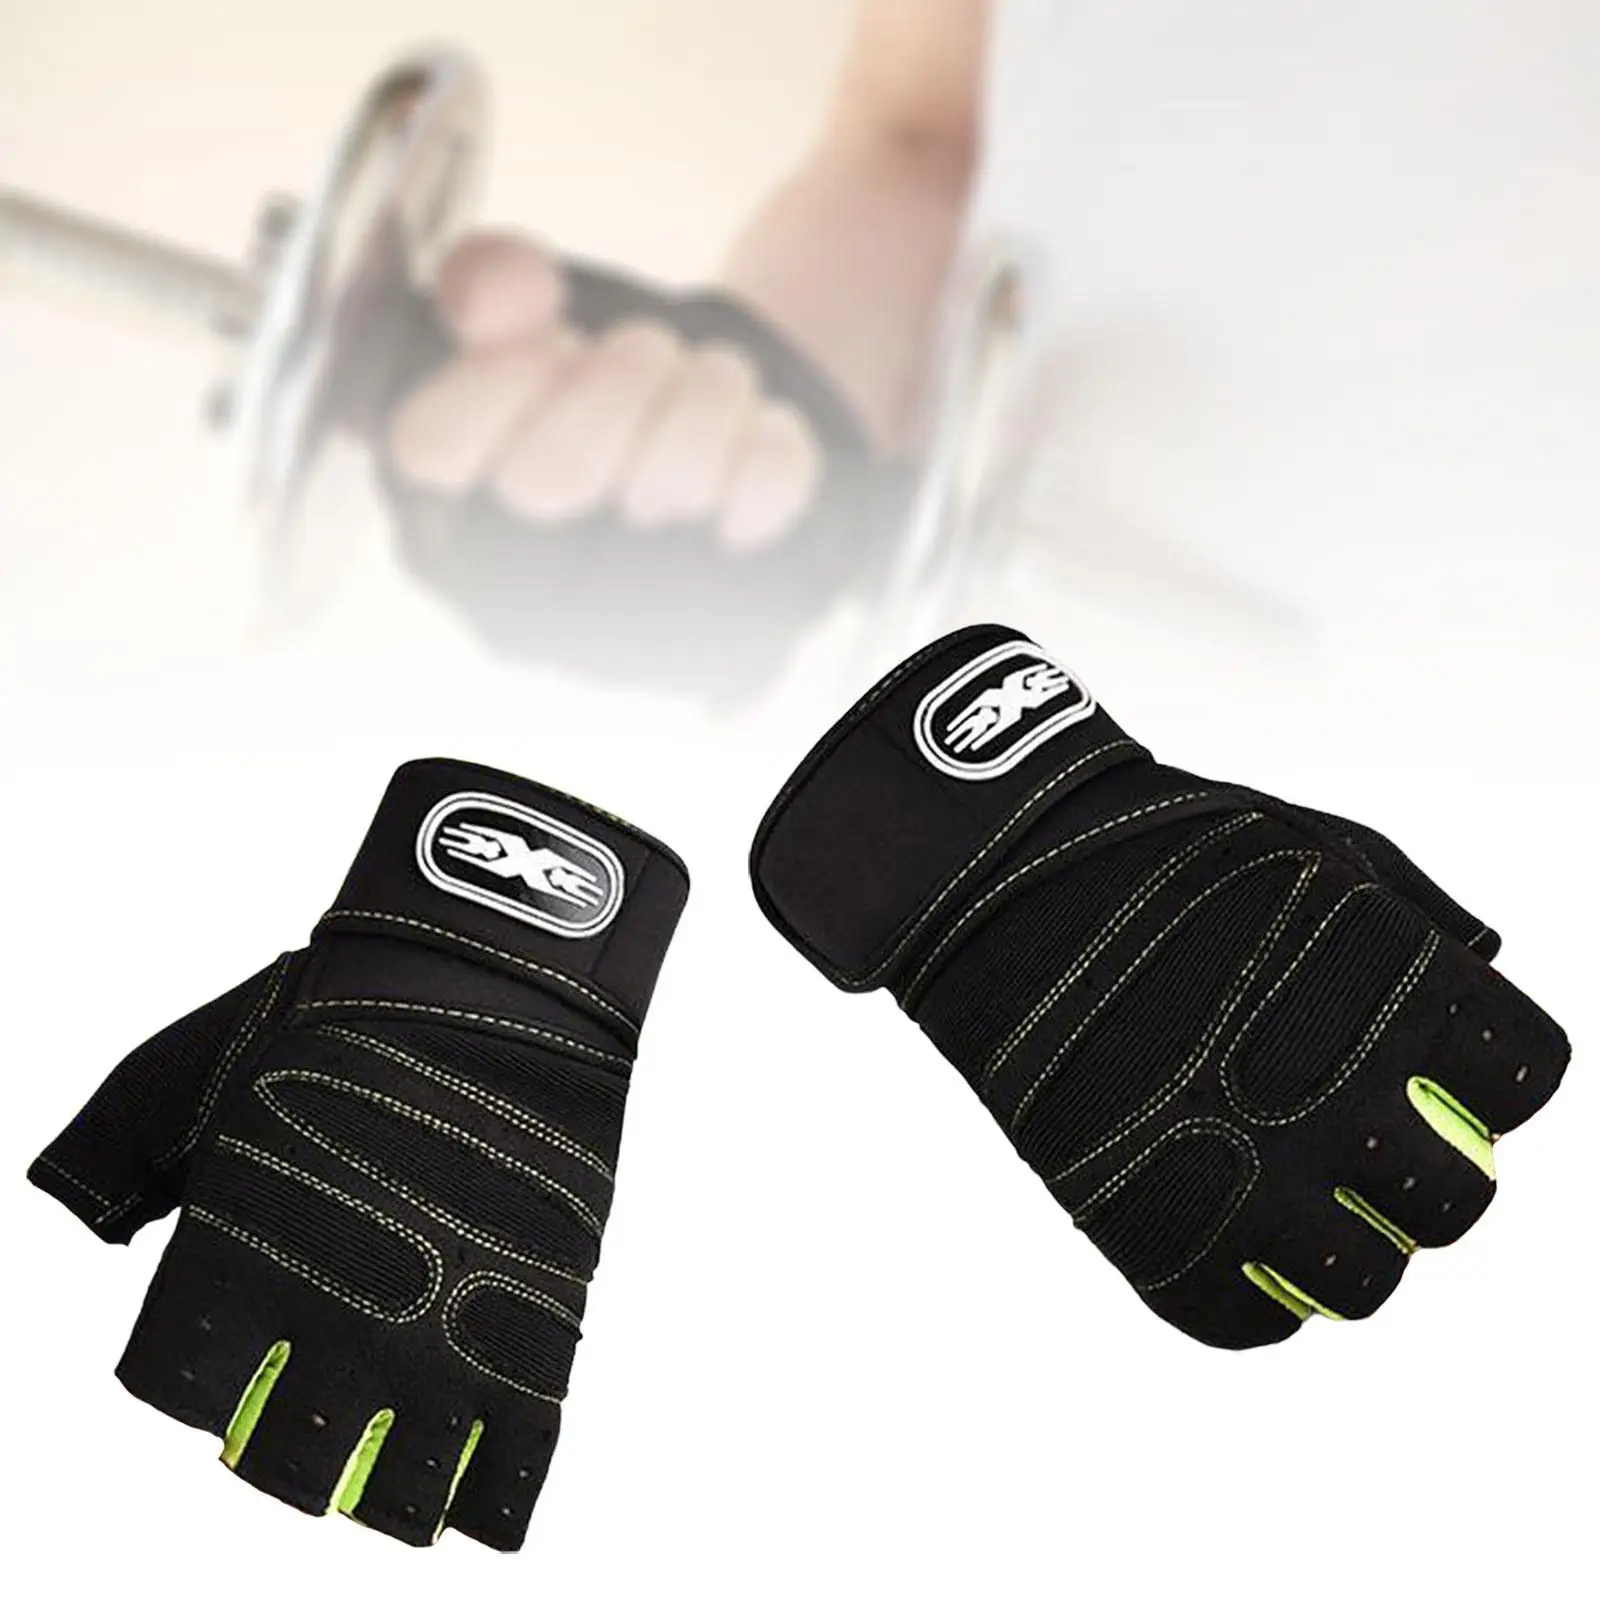 Gym Gloves Wrist Support Deadlift Gloves Weight Lifting Gloves for Sport Equipment Pull Ups Powerlifting Strength Training